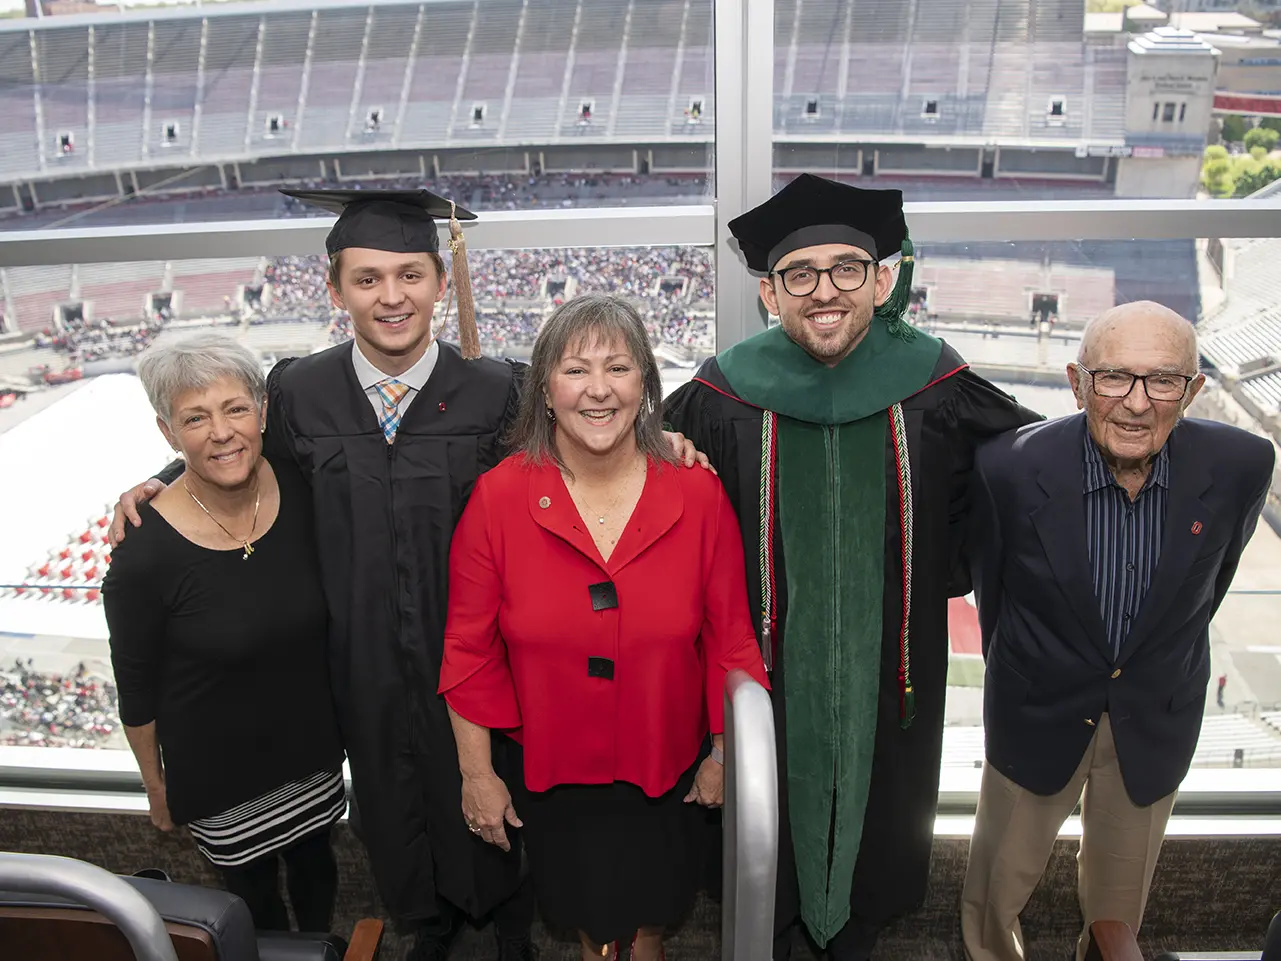 In a photo of a family, two young men wear graduation caps, gowns and smiles, as their mom, aunt and grandpa stand proudly by their sides.